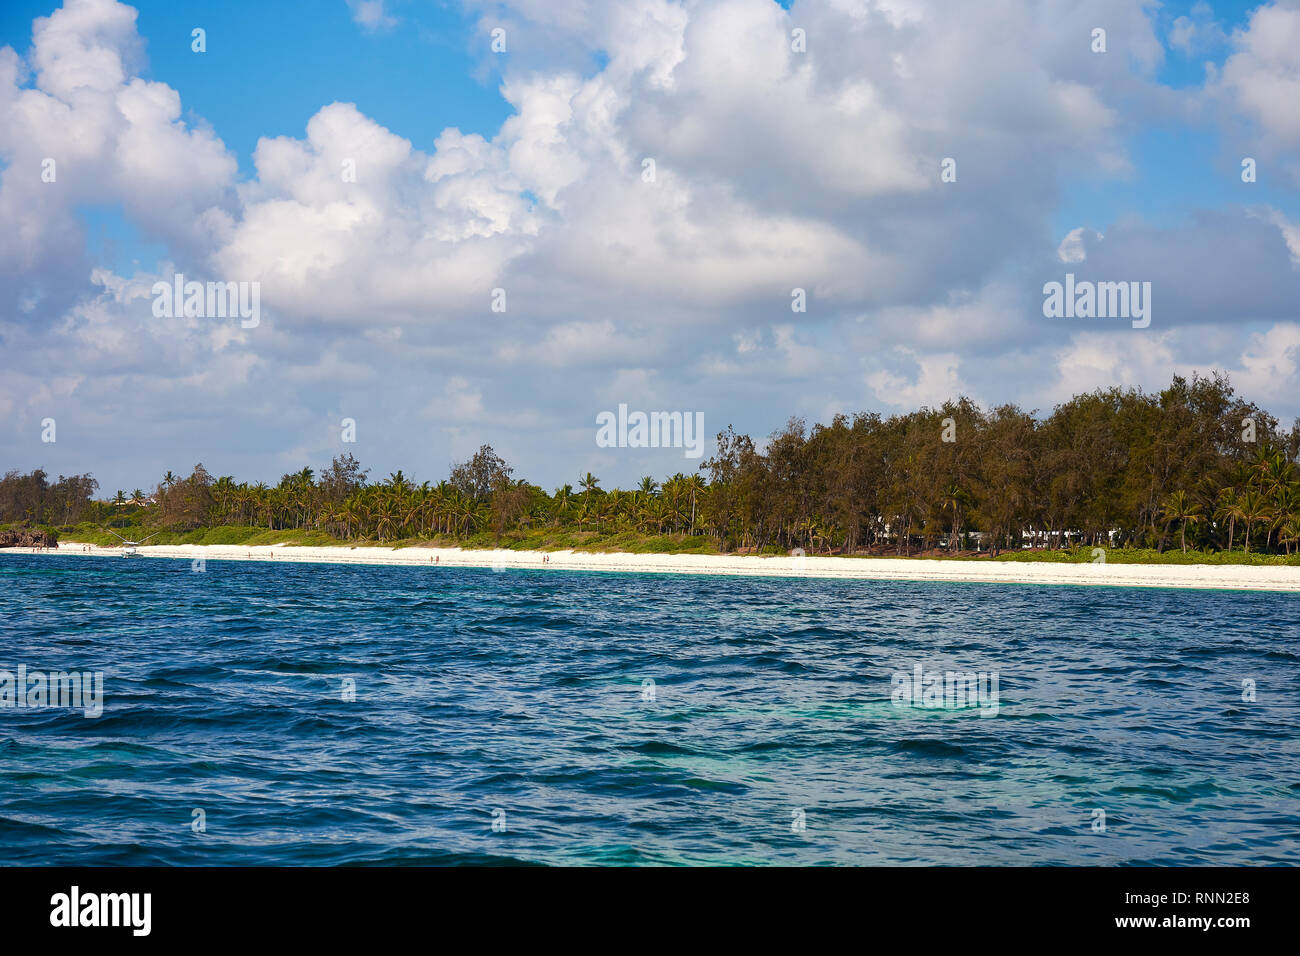 View of coastline with beach in Kenya, Africa. People, tourists on vacation and sea with waves and surf, under a blue sky with clouds. Stock Photo